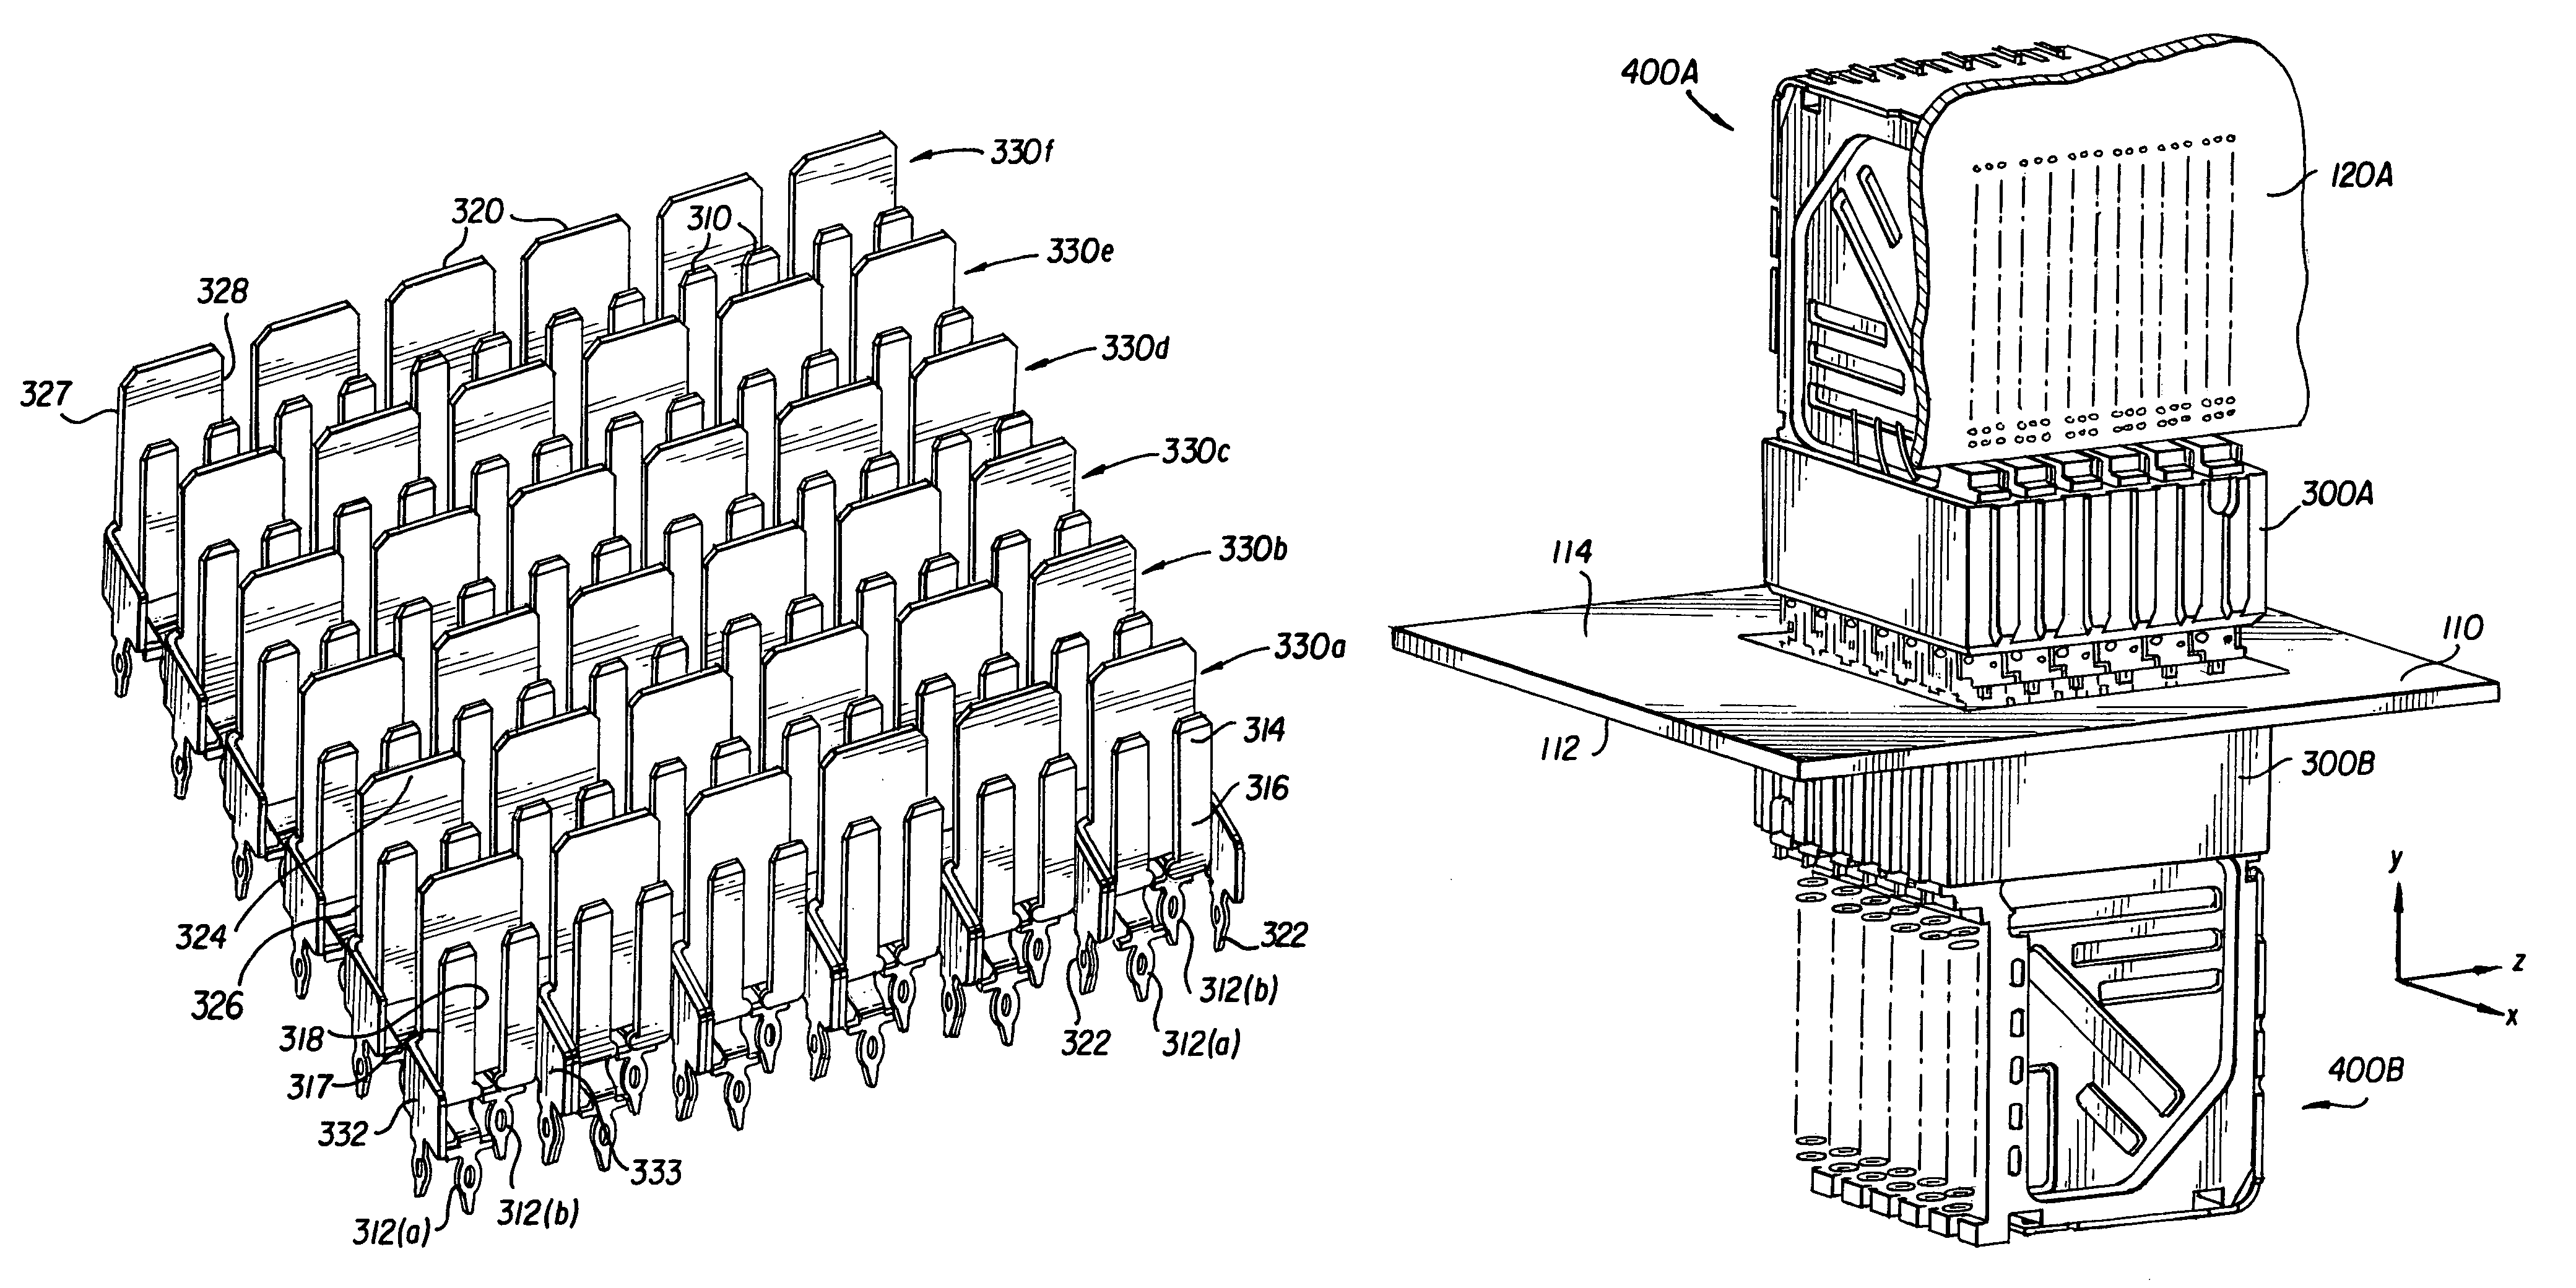 Differential electrical connector assembly